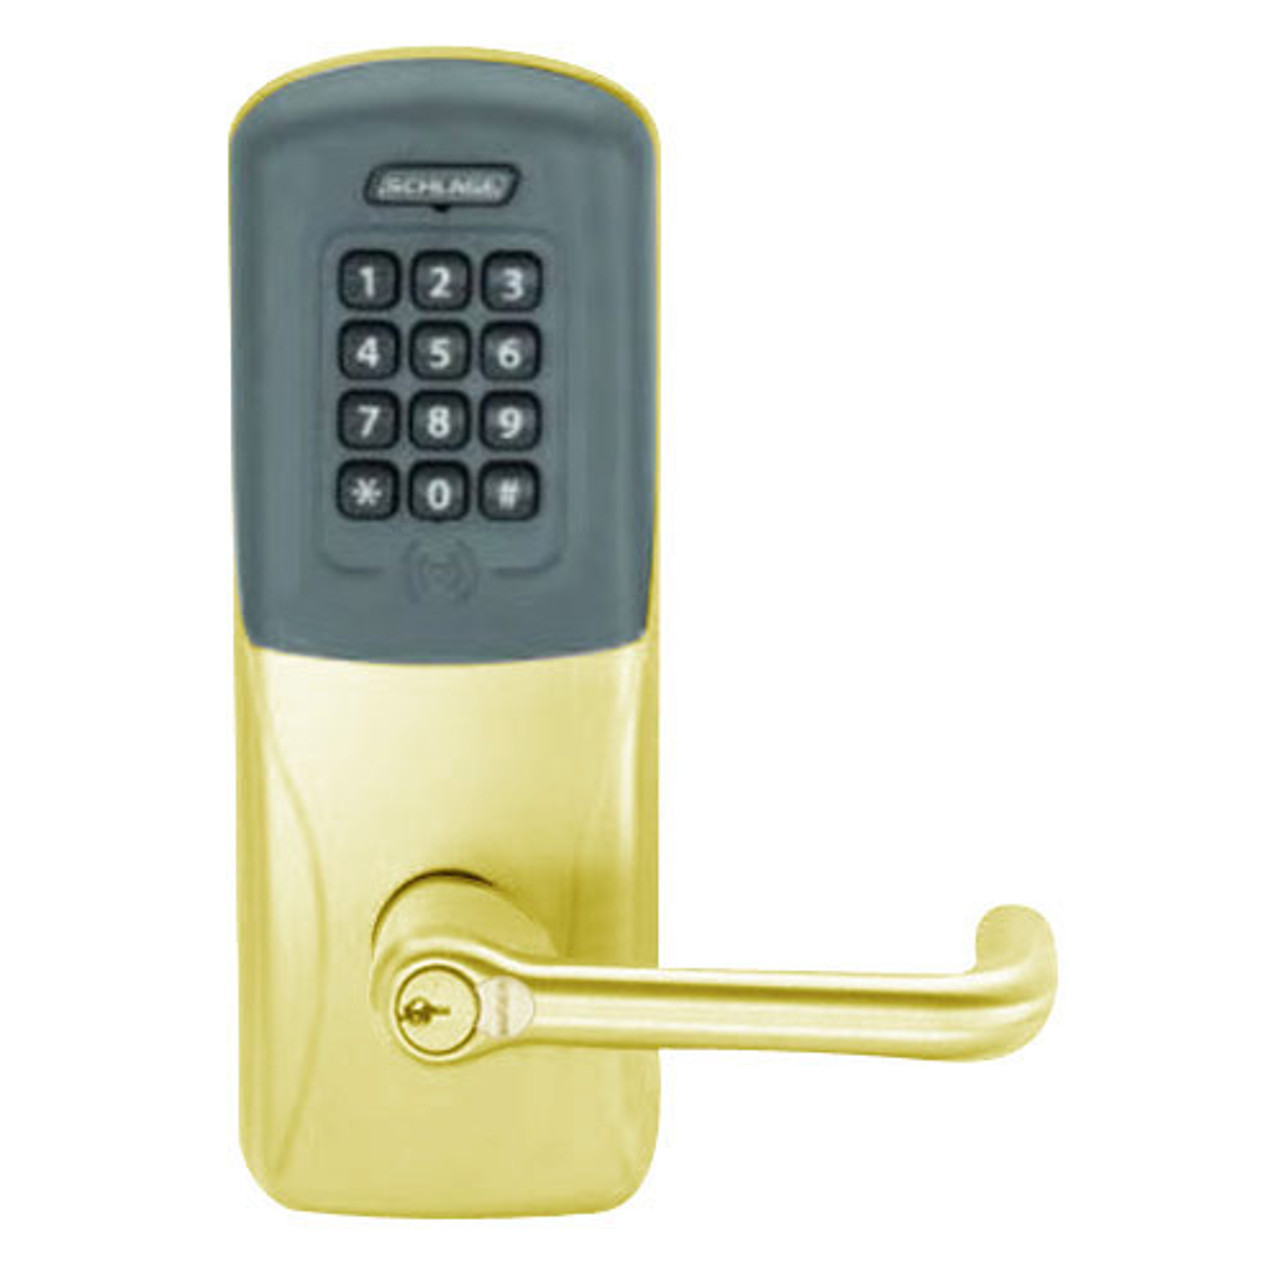 CO200-MD-40-PRK-TLR-GD-29R-606 Mortise Deadbolt Standalone Electronic Proximity with Keypad Locks in Satin Brass